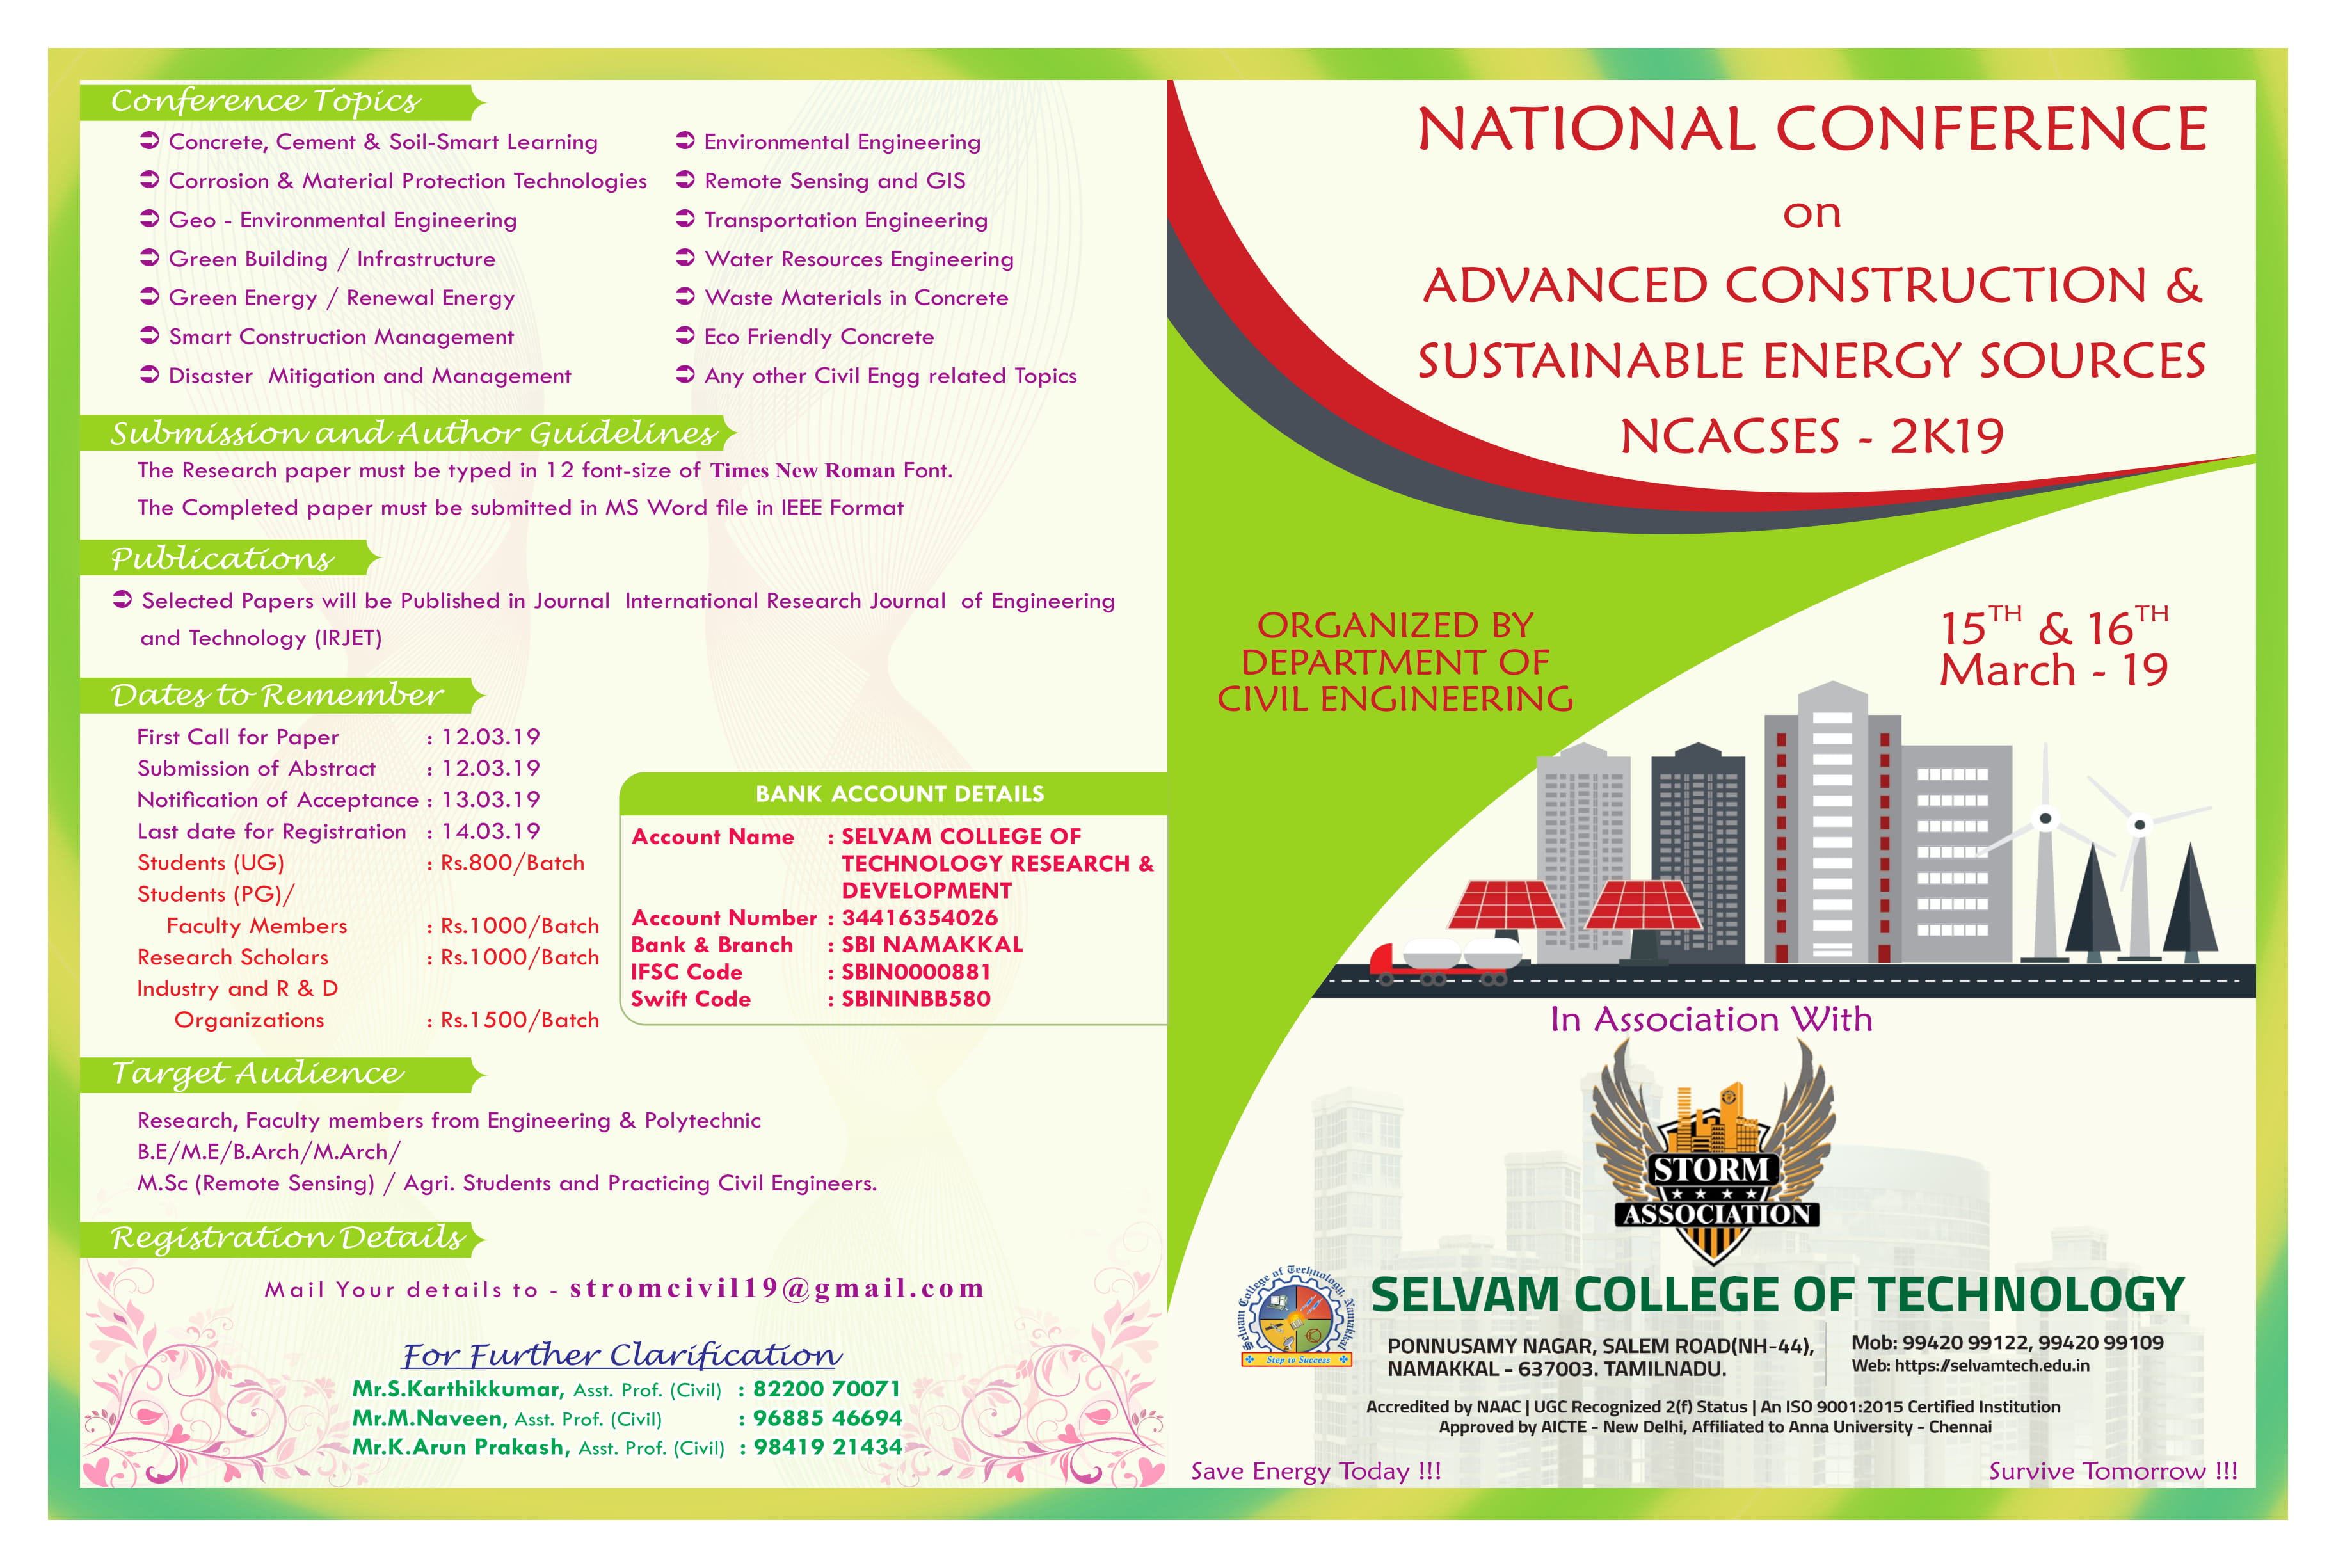 National Conference on Advanced Construction and Sustainable Energy Sources NCACSES 2k19